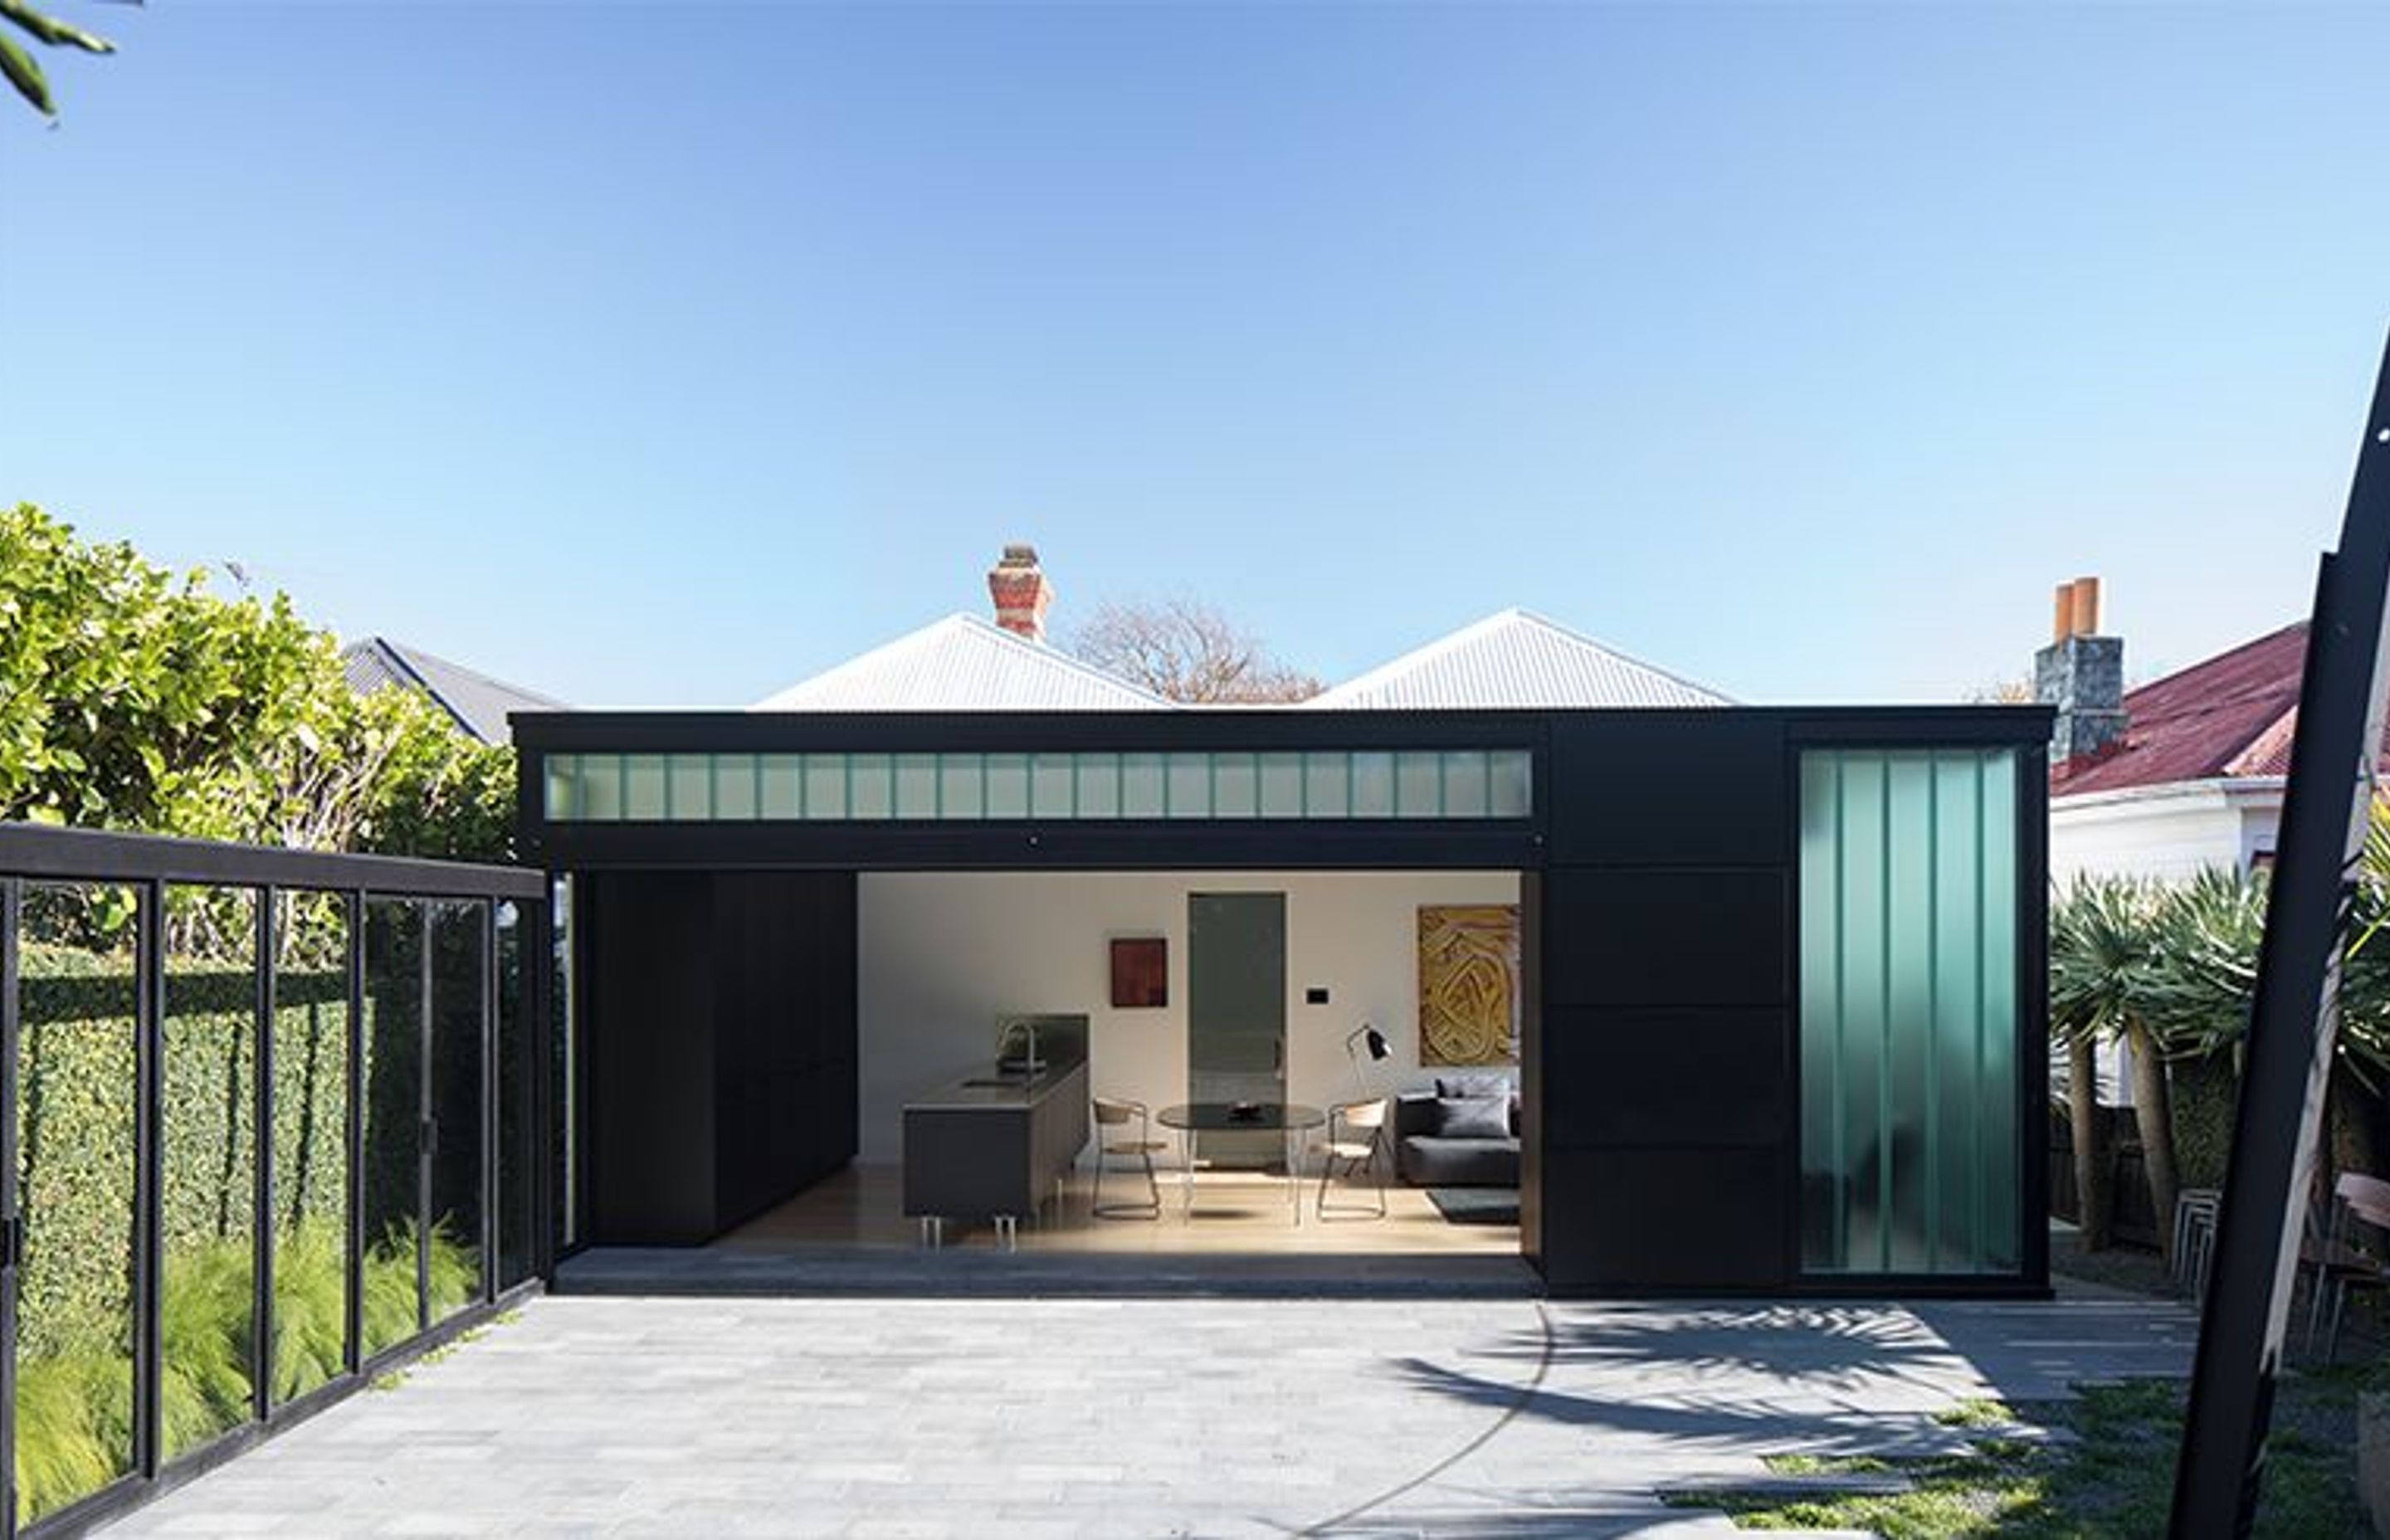 The Lightbox project involved the removal of an existing lean-to living space at the back of a traditional Ponsonby villa.